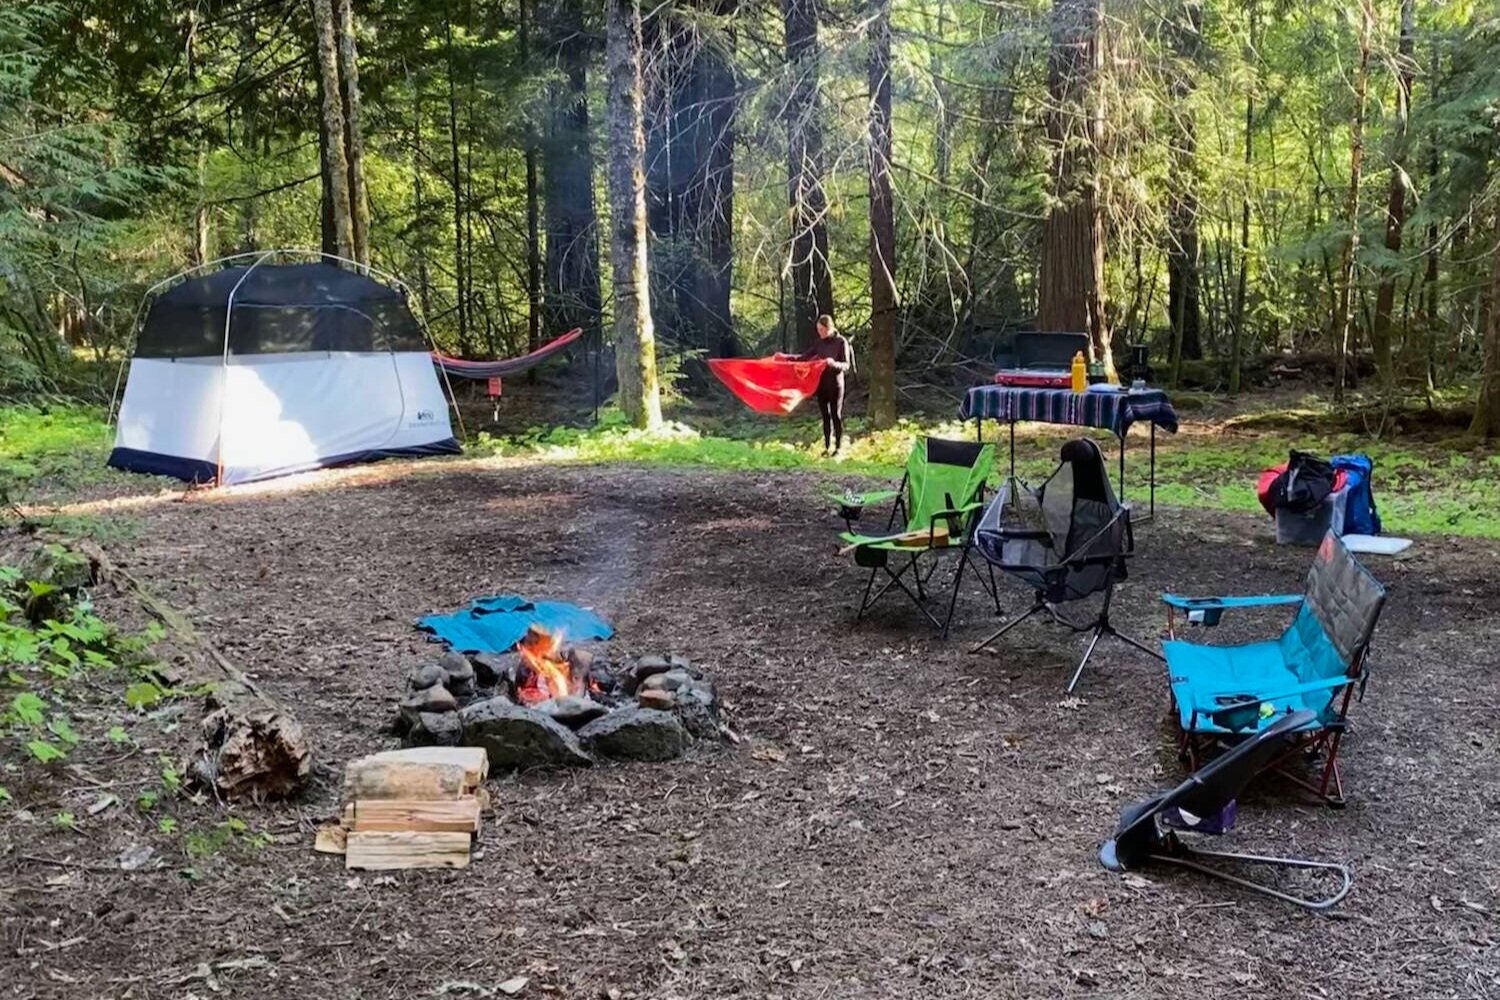 The REI Grand Hut 4 in the Backwoods of the Pacific Northwest